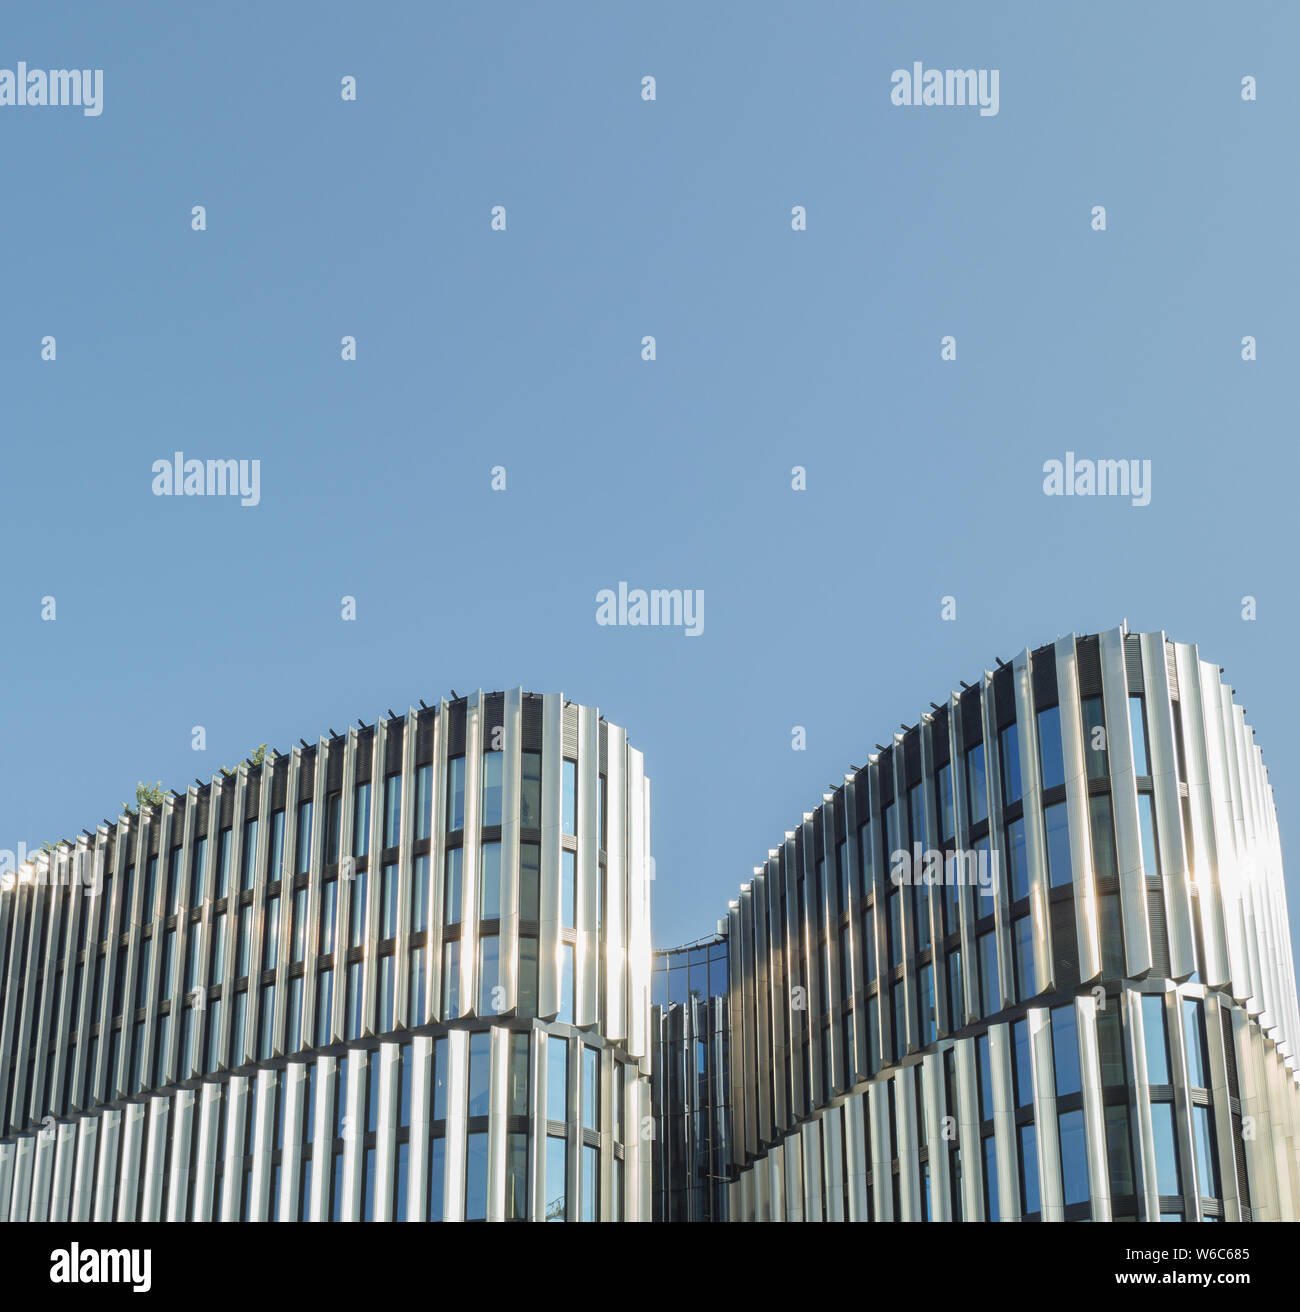 A wavy modern building reflecting sunlight on cloudless plain blue sky as a simple background Stock Photo